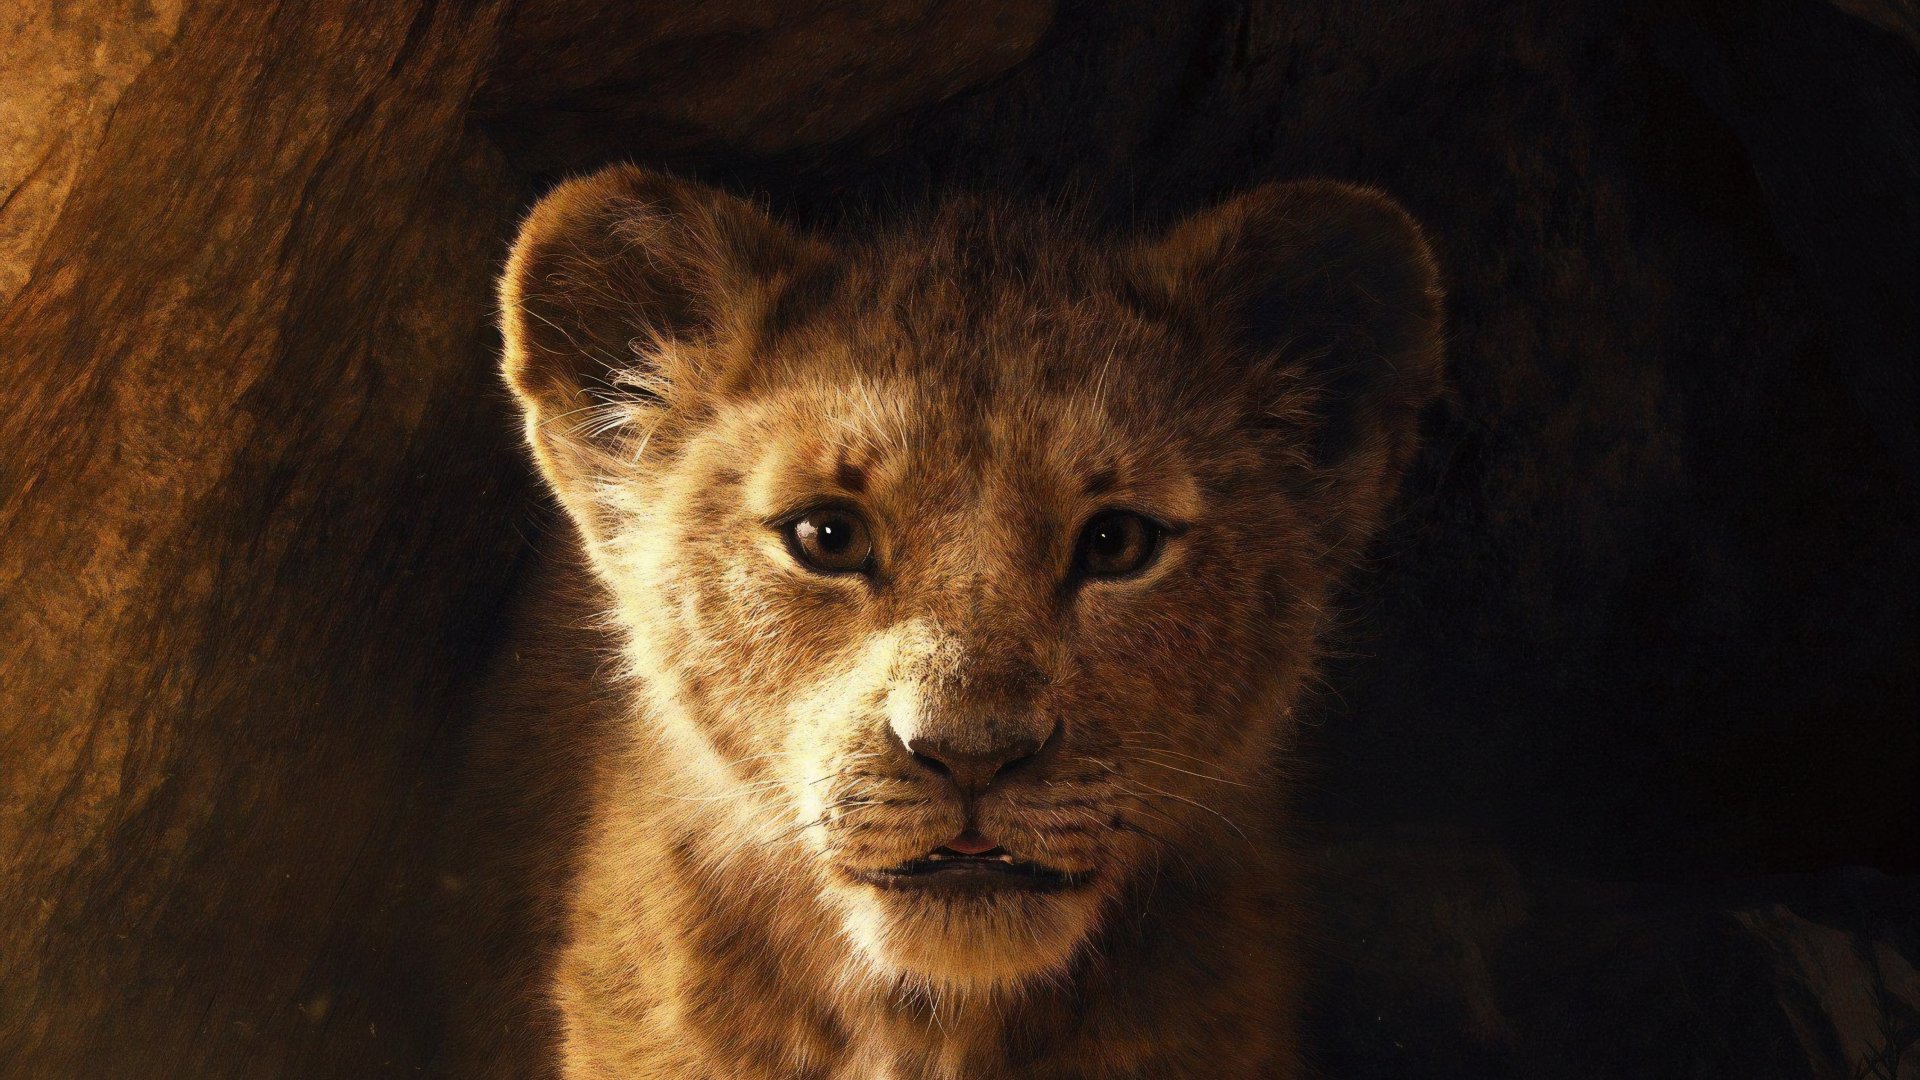 The Lion King HD Wallpaper Background Image